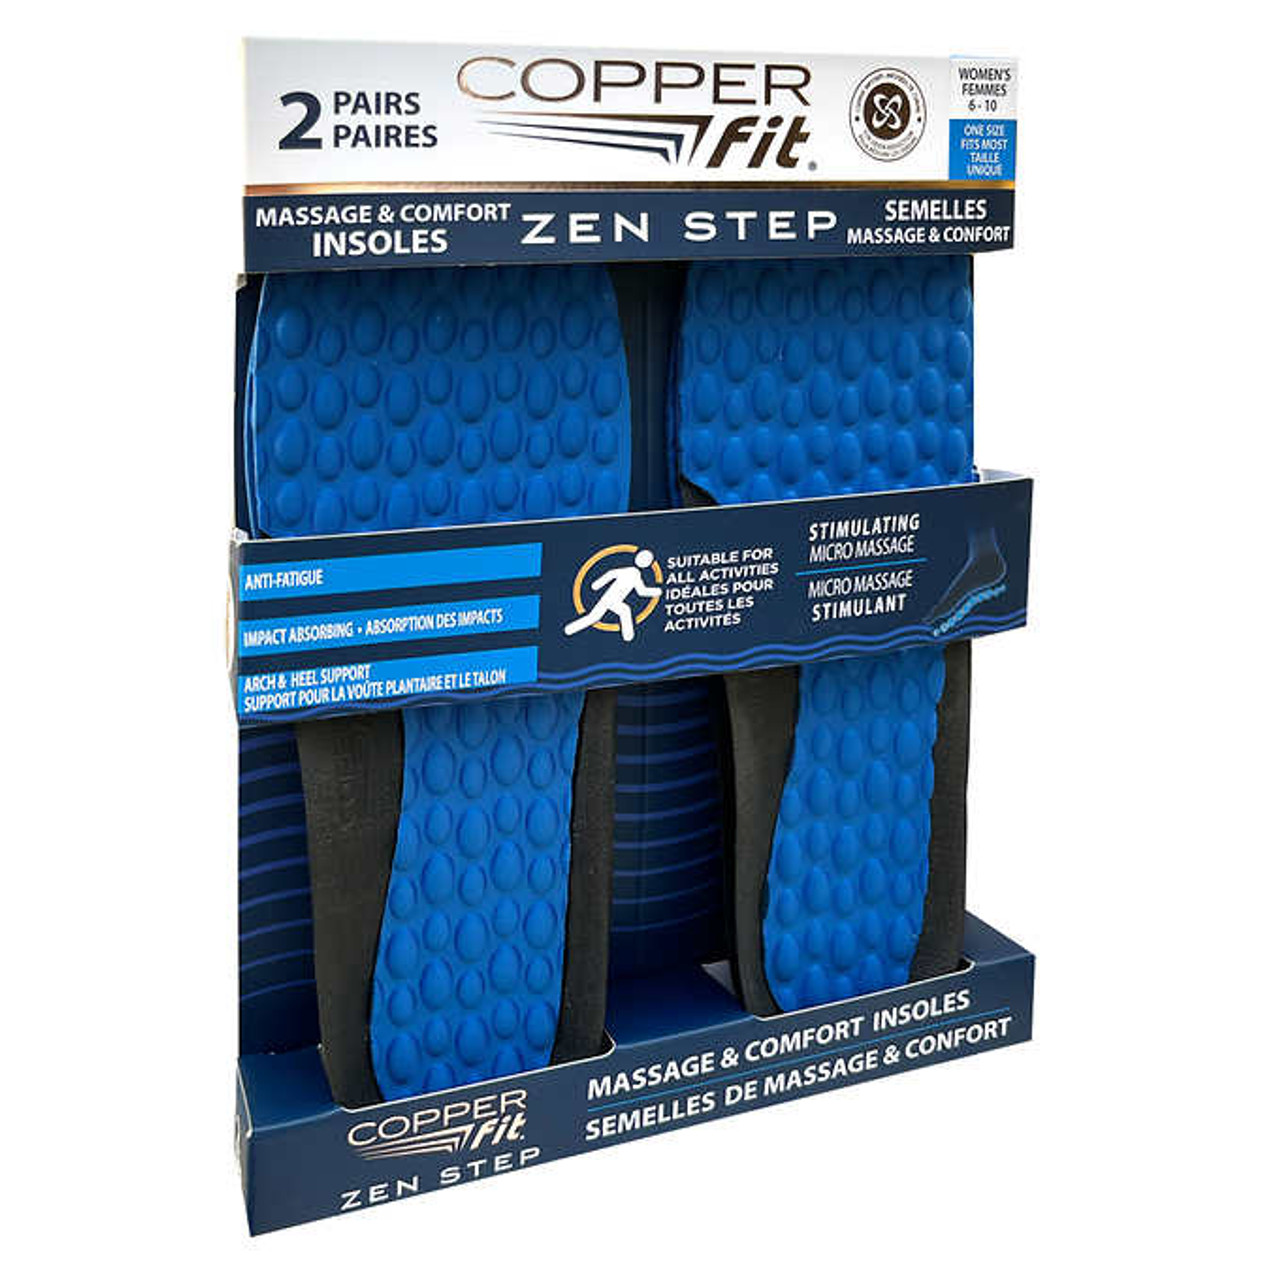 Copper Fit Zen Step Insoles, 2-Pack - Enhanced Comfort for All-Day Wear - Chicken Pieces